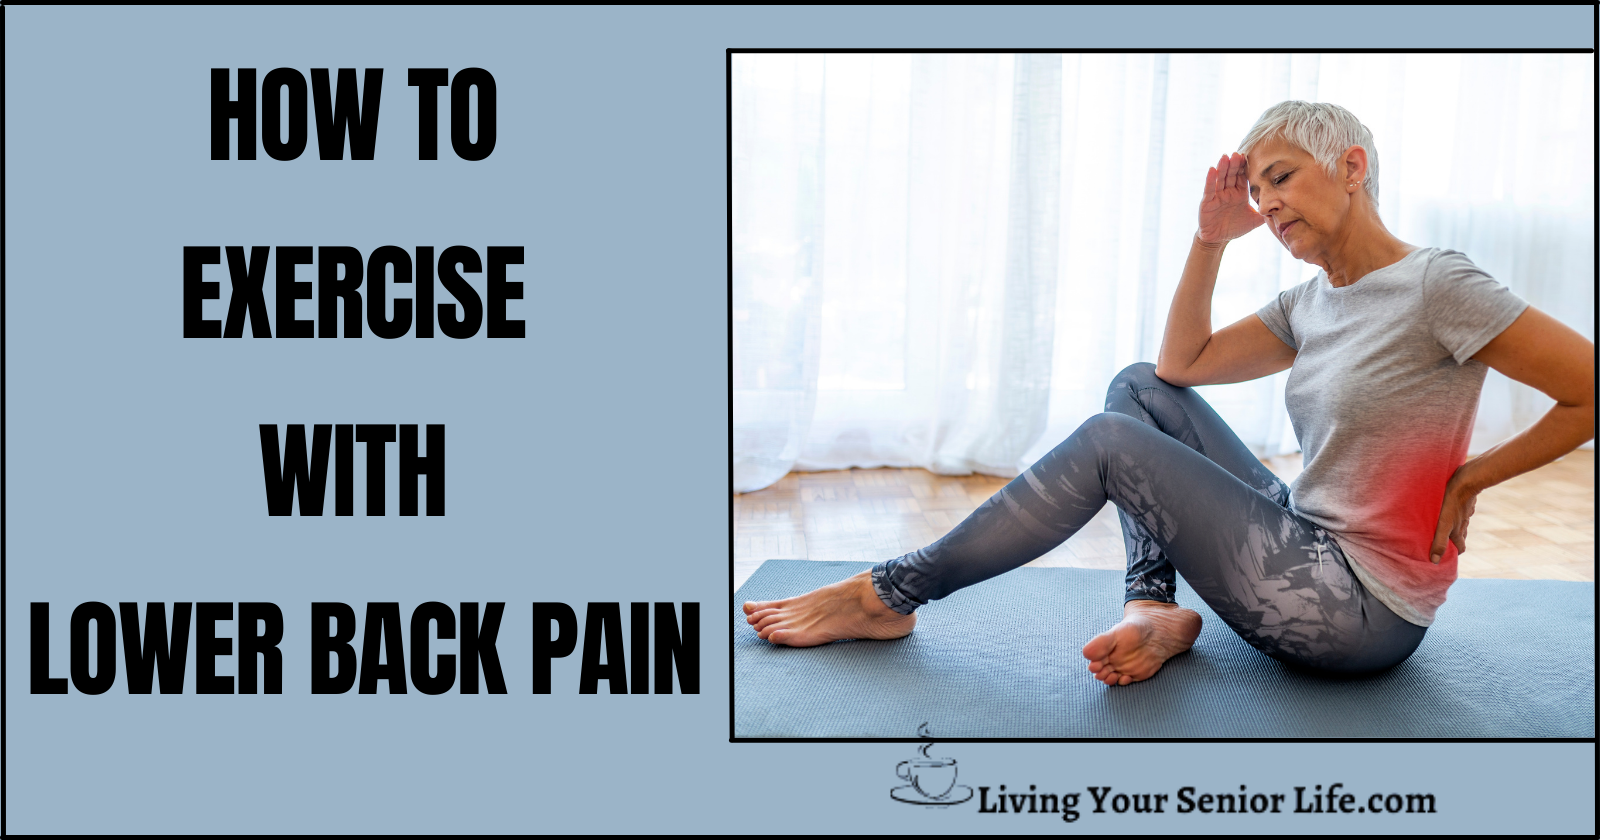 How To Exercise With Lower Back Pain